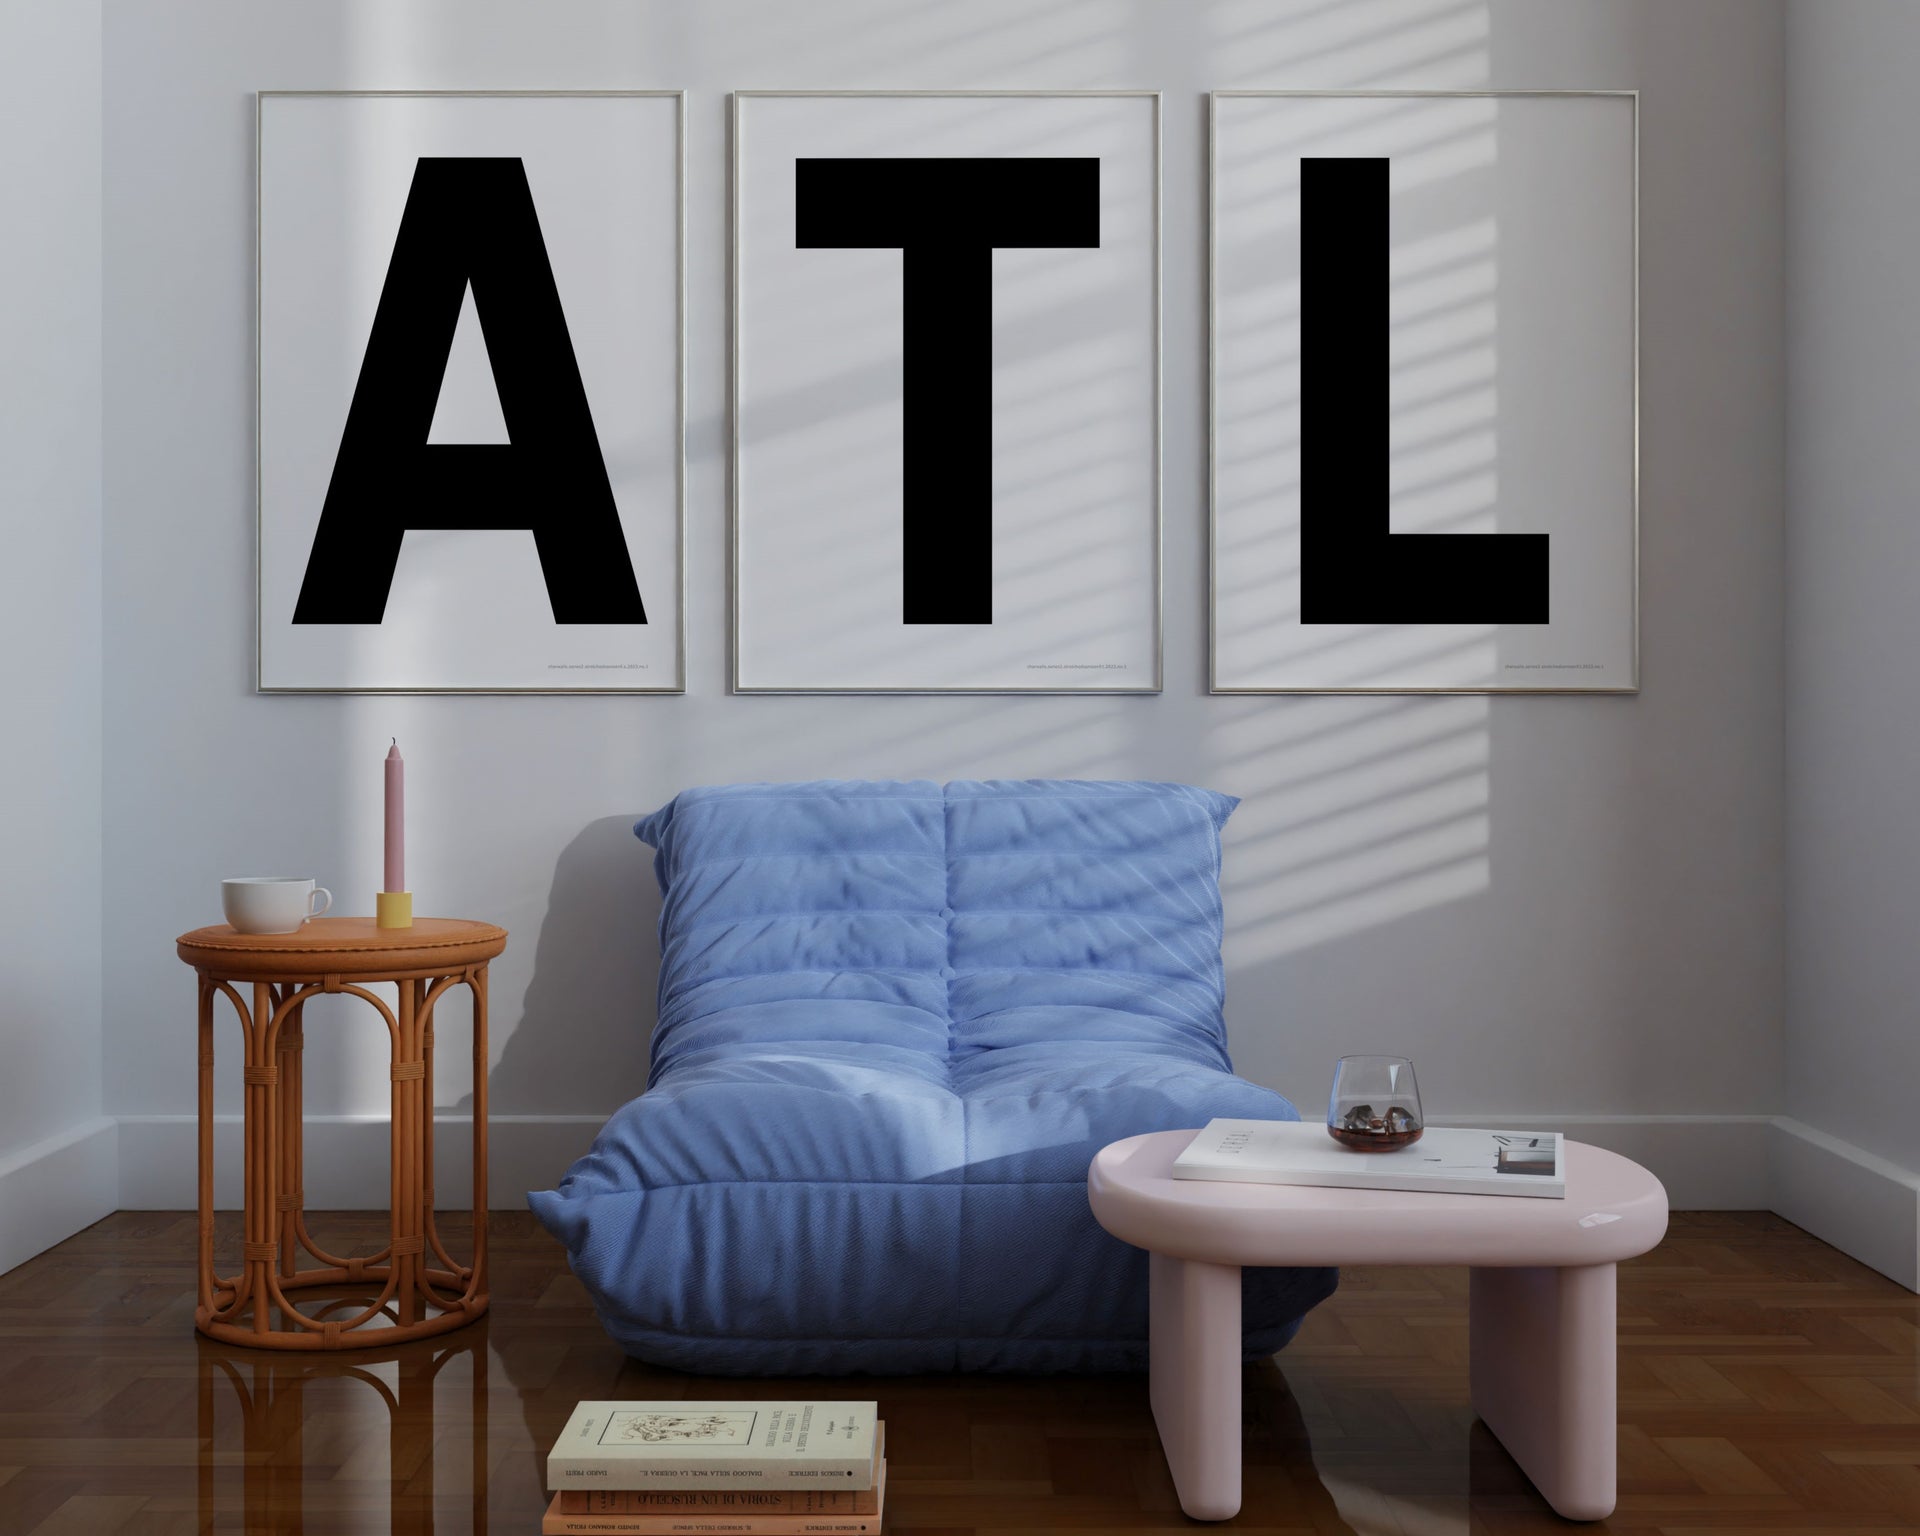 Three large framed black and white letter art prints spelling out ATL hanging above a blue chair.